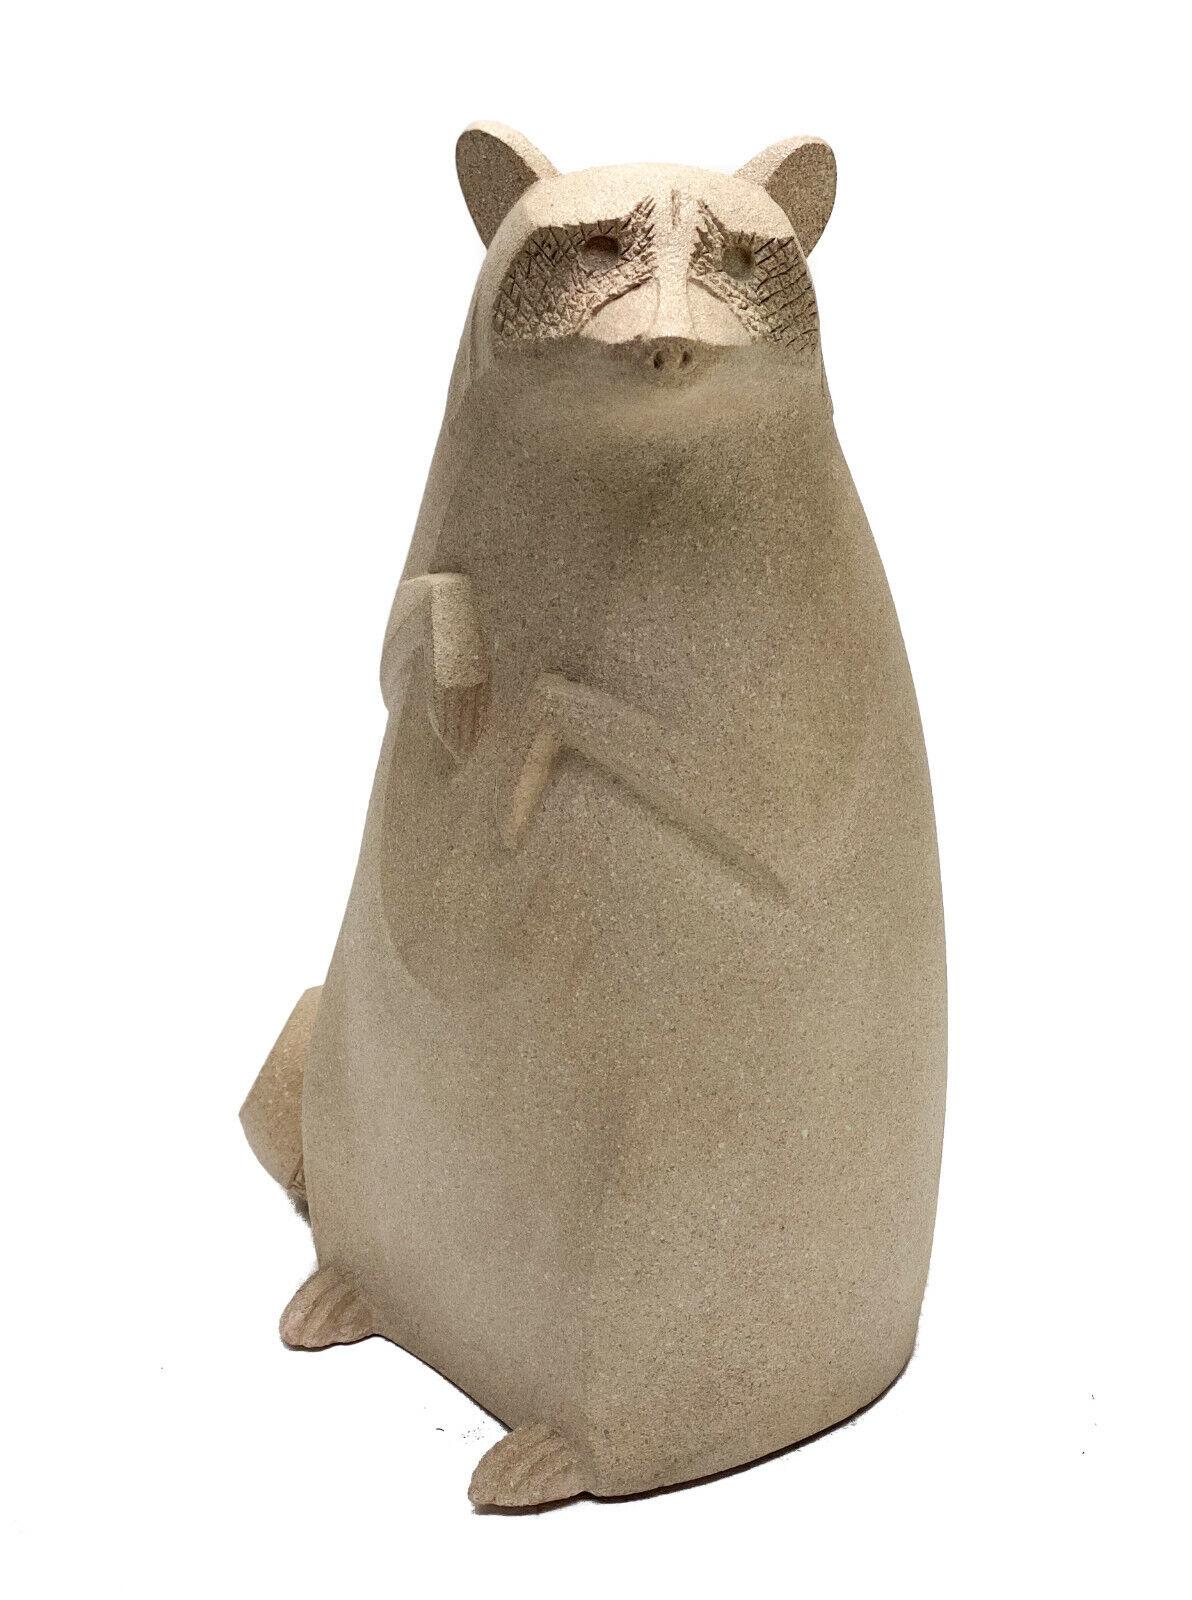 Mimi Murphey Ceramic Racoon figurine, signed

The figurine is a modernist take on a racoon. Artist signed Mimi Murphey to the underside base dated to 1975.

Additional information:
Type: Figurine 
Material: Ceramic & Porcelain
Dimension: 8